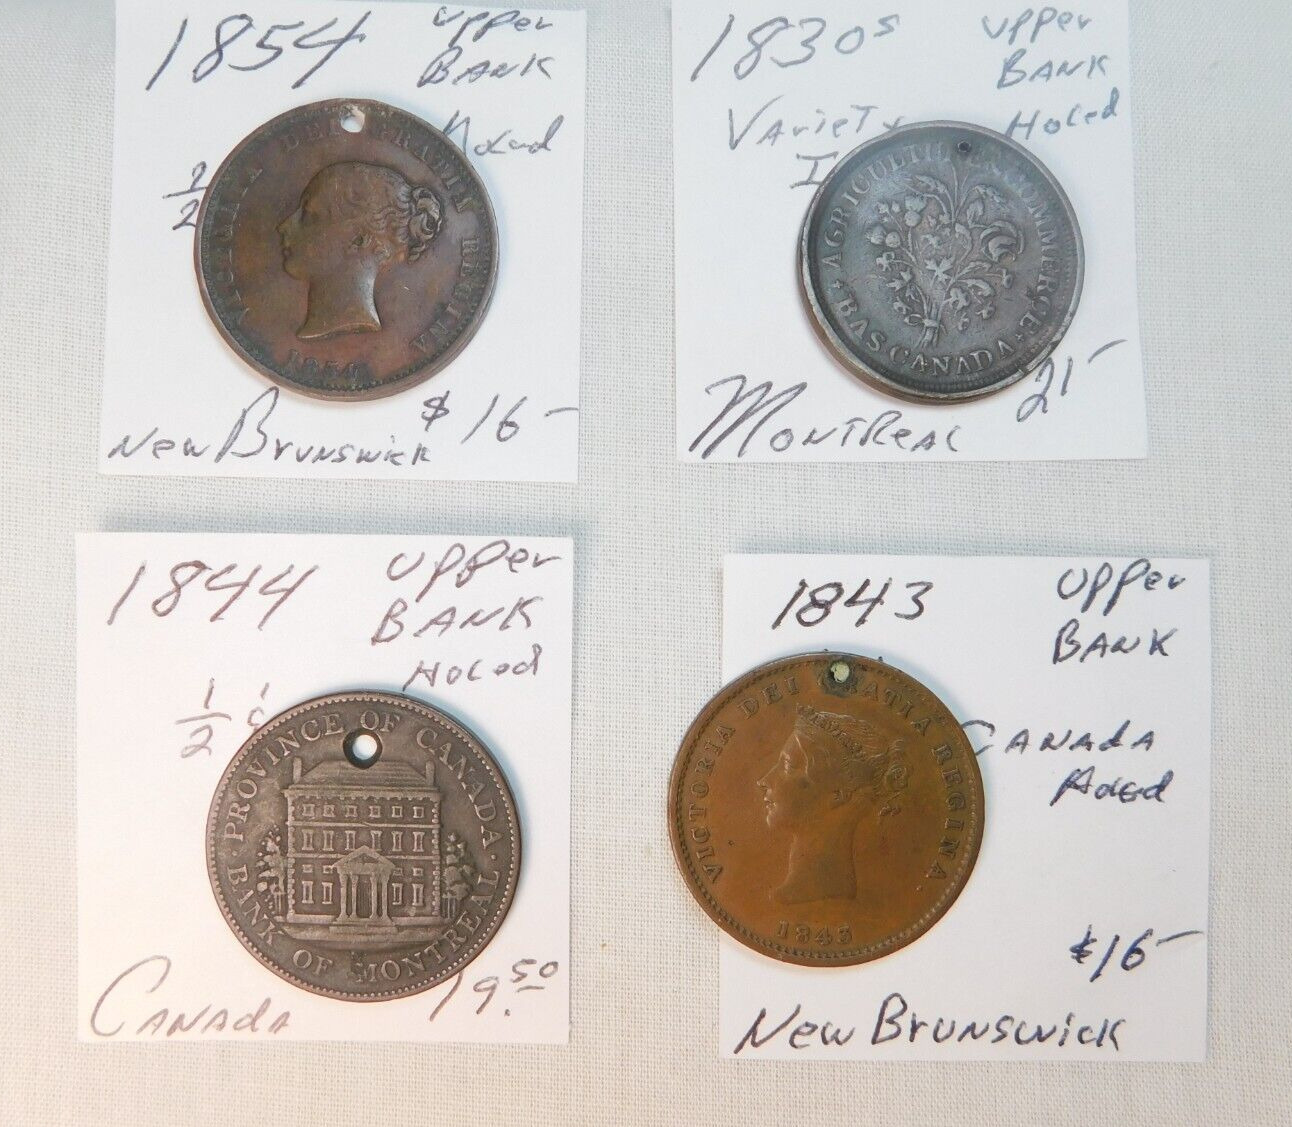 4 VERY EARLY CANADIAN BANK TOKENS 1830S, 1843, 1844, 1854!!!  - YOU GET ALL 4!!⭐